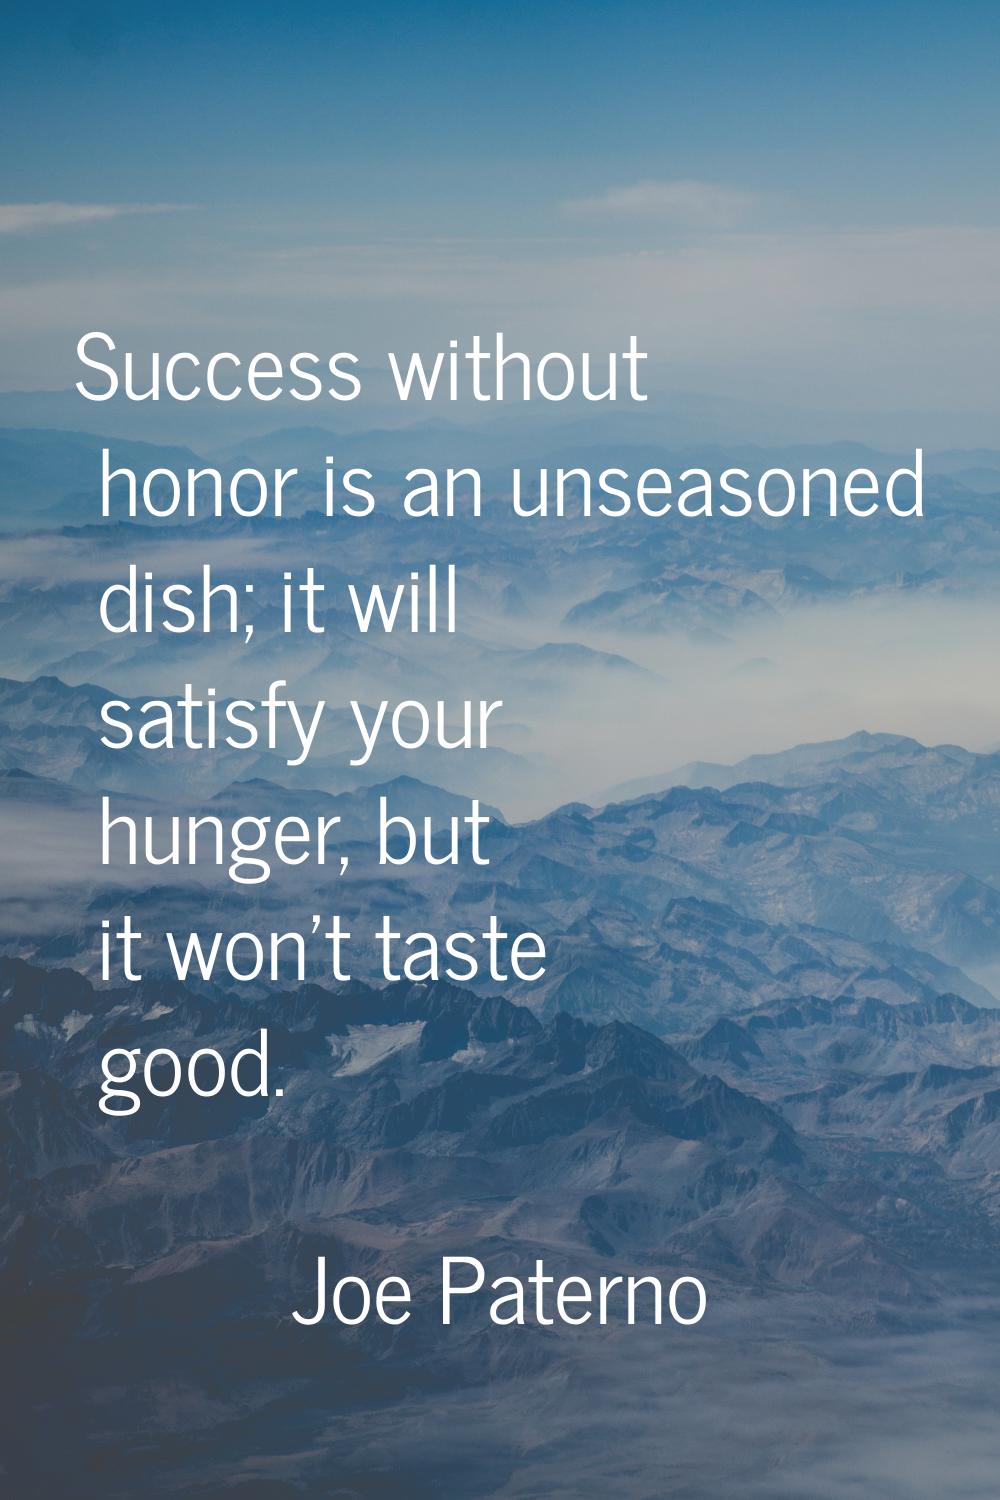 Success without honor is an unseasoned dish; it will satisfy your hunger, but it won't taste good.